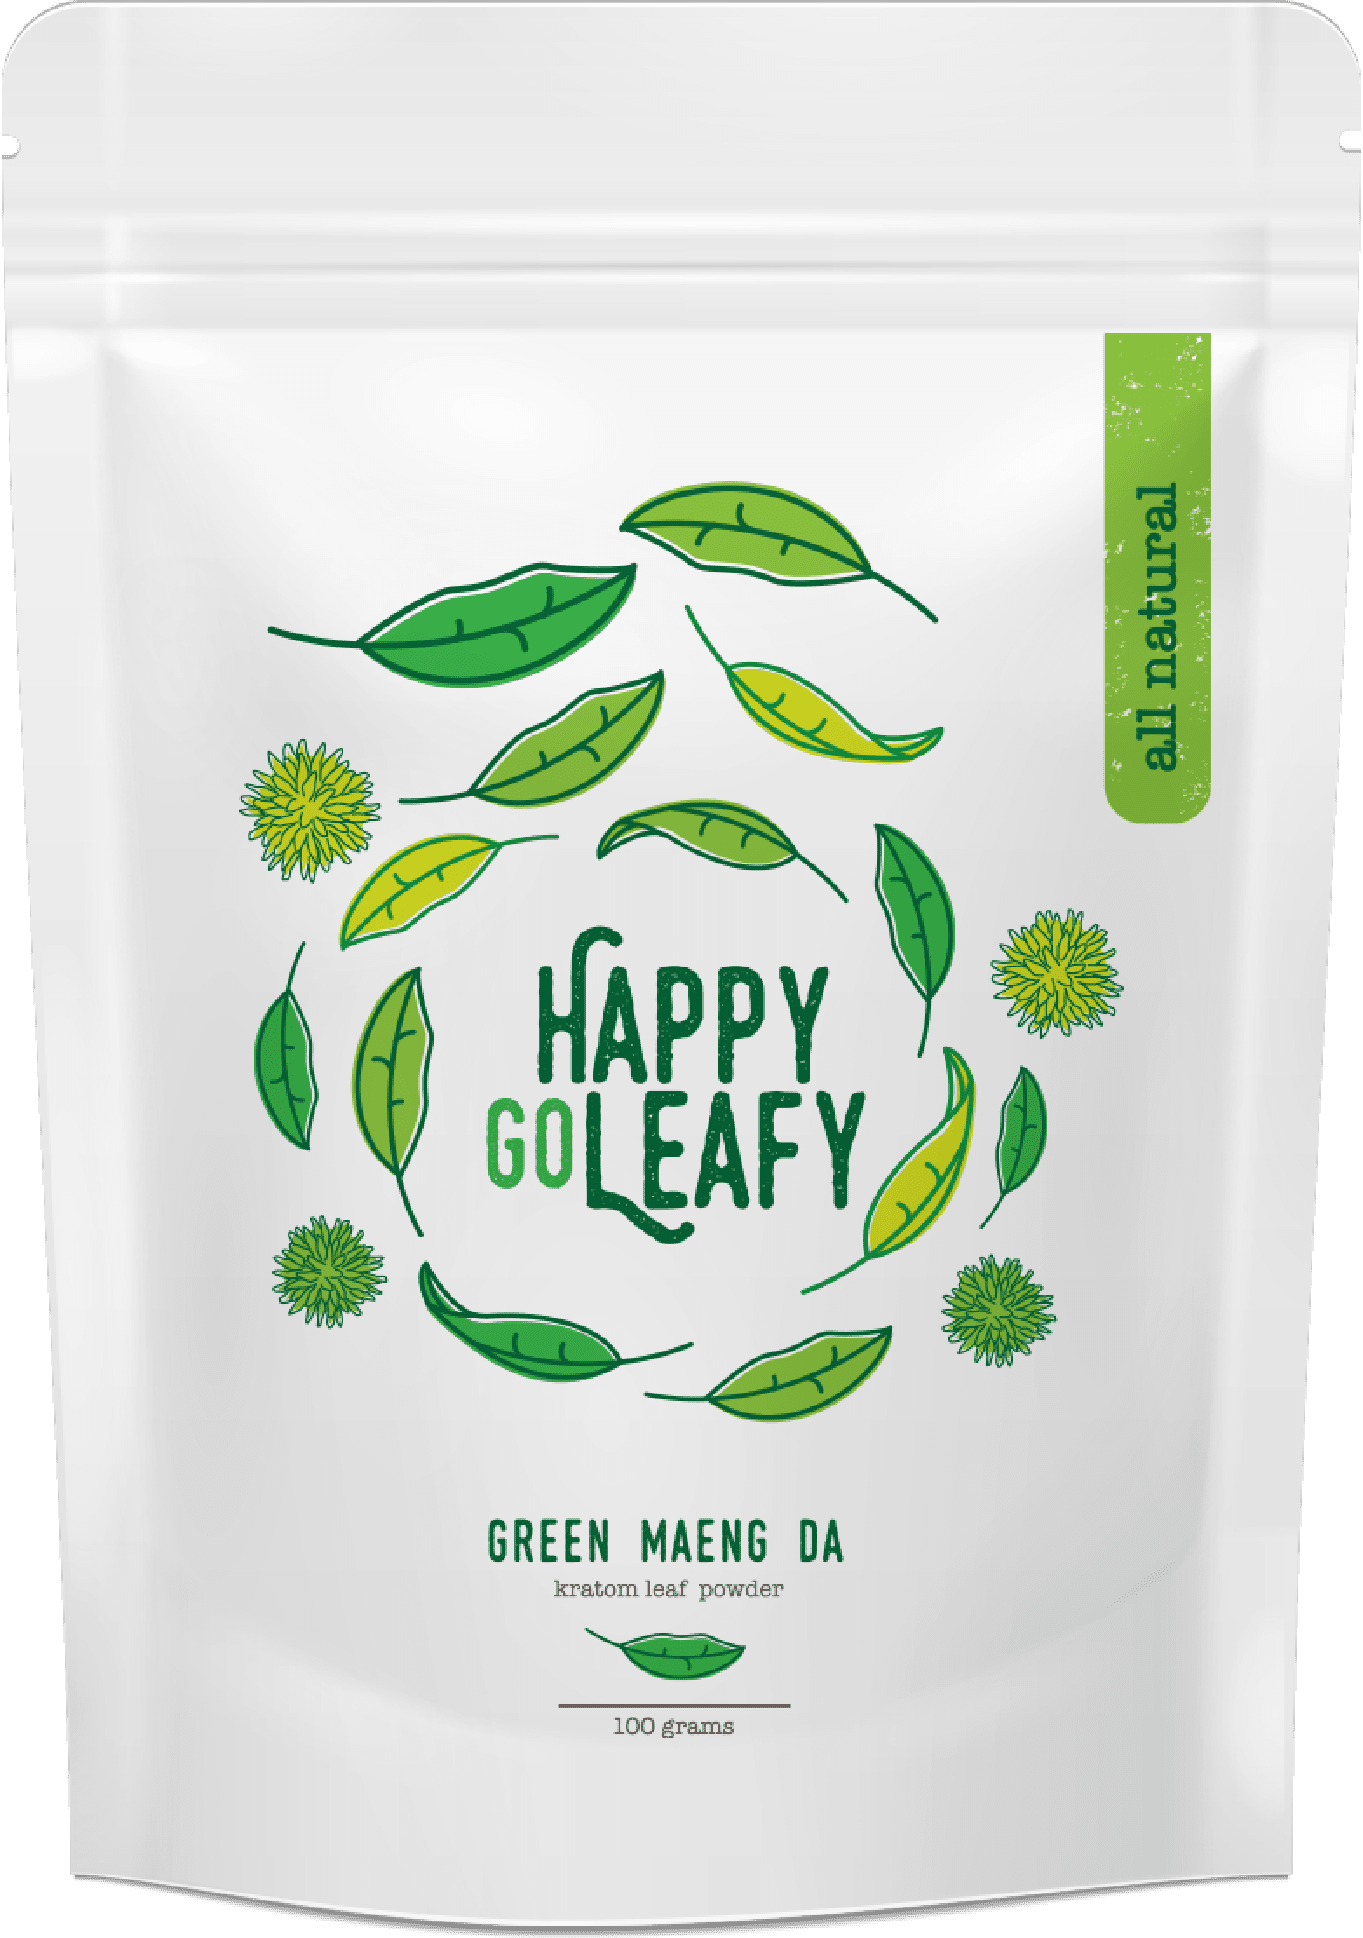 Happy go leafy product